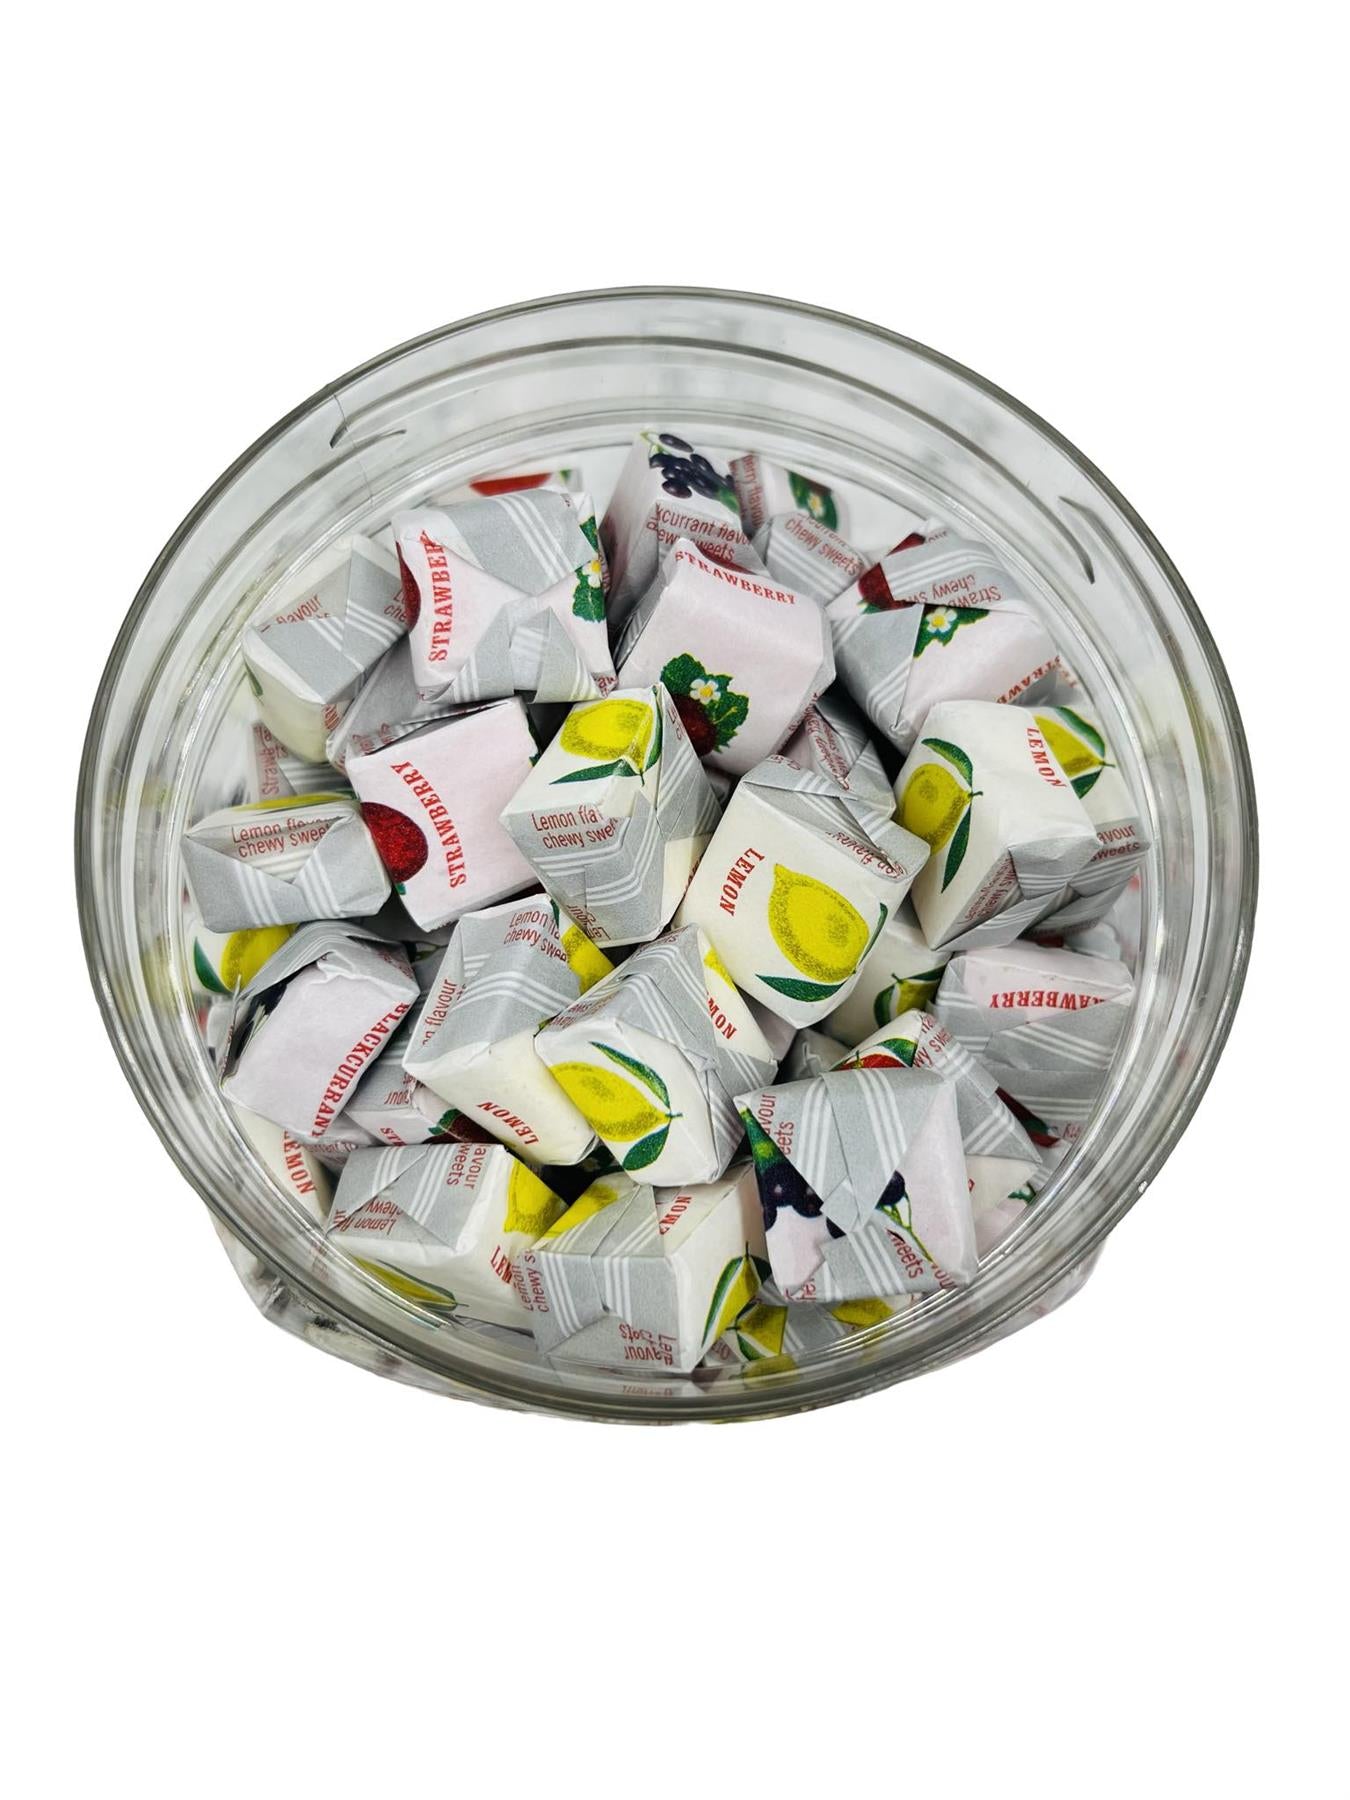 Simway Sweets Jar 880g - Assorted Fruit Caramel Chews - Individually Wrapped Sweets - Approximately 190 Pieces